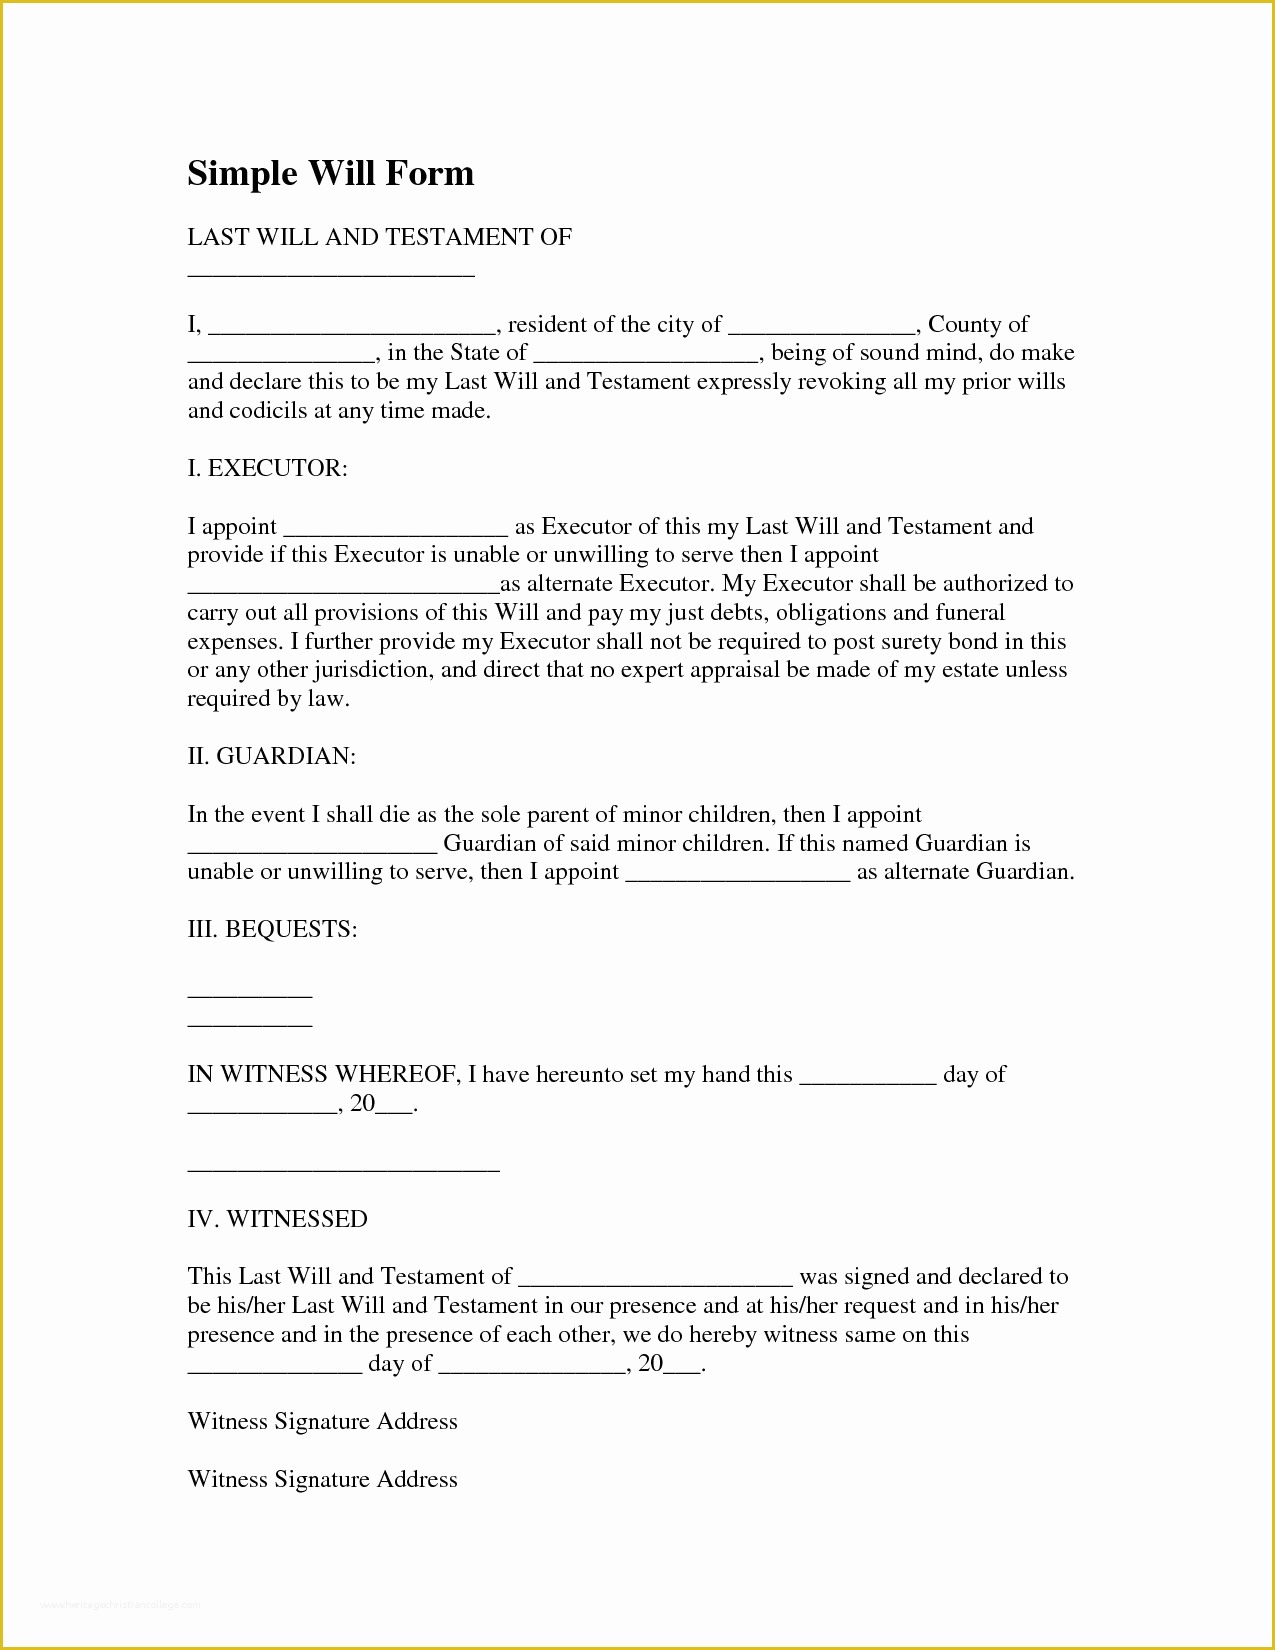 Last Will and Testament Texas Free Template Of form Last Will and Testament form